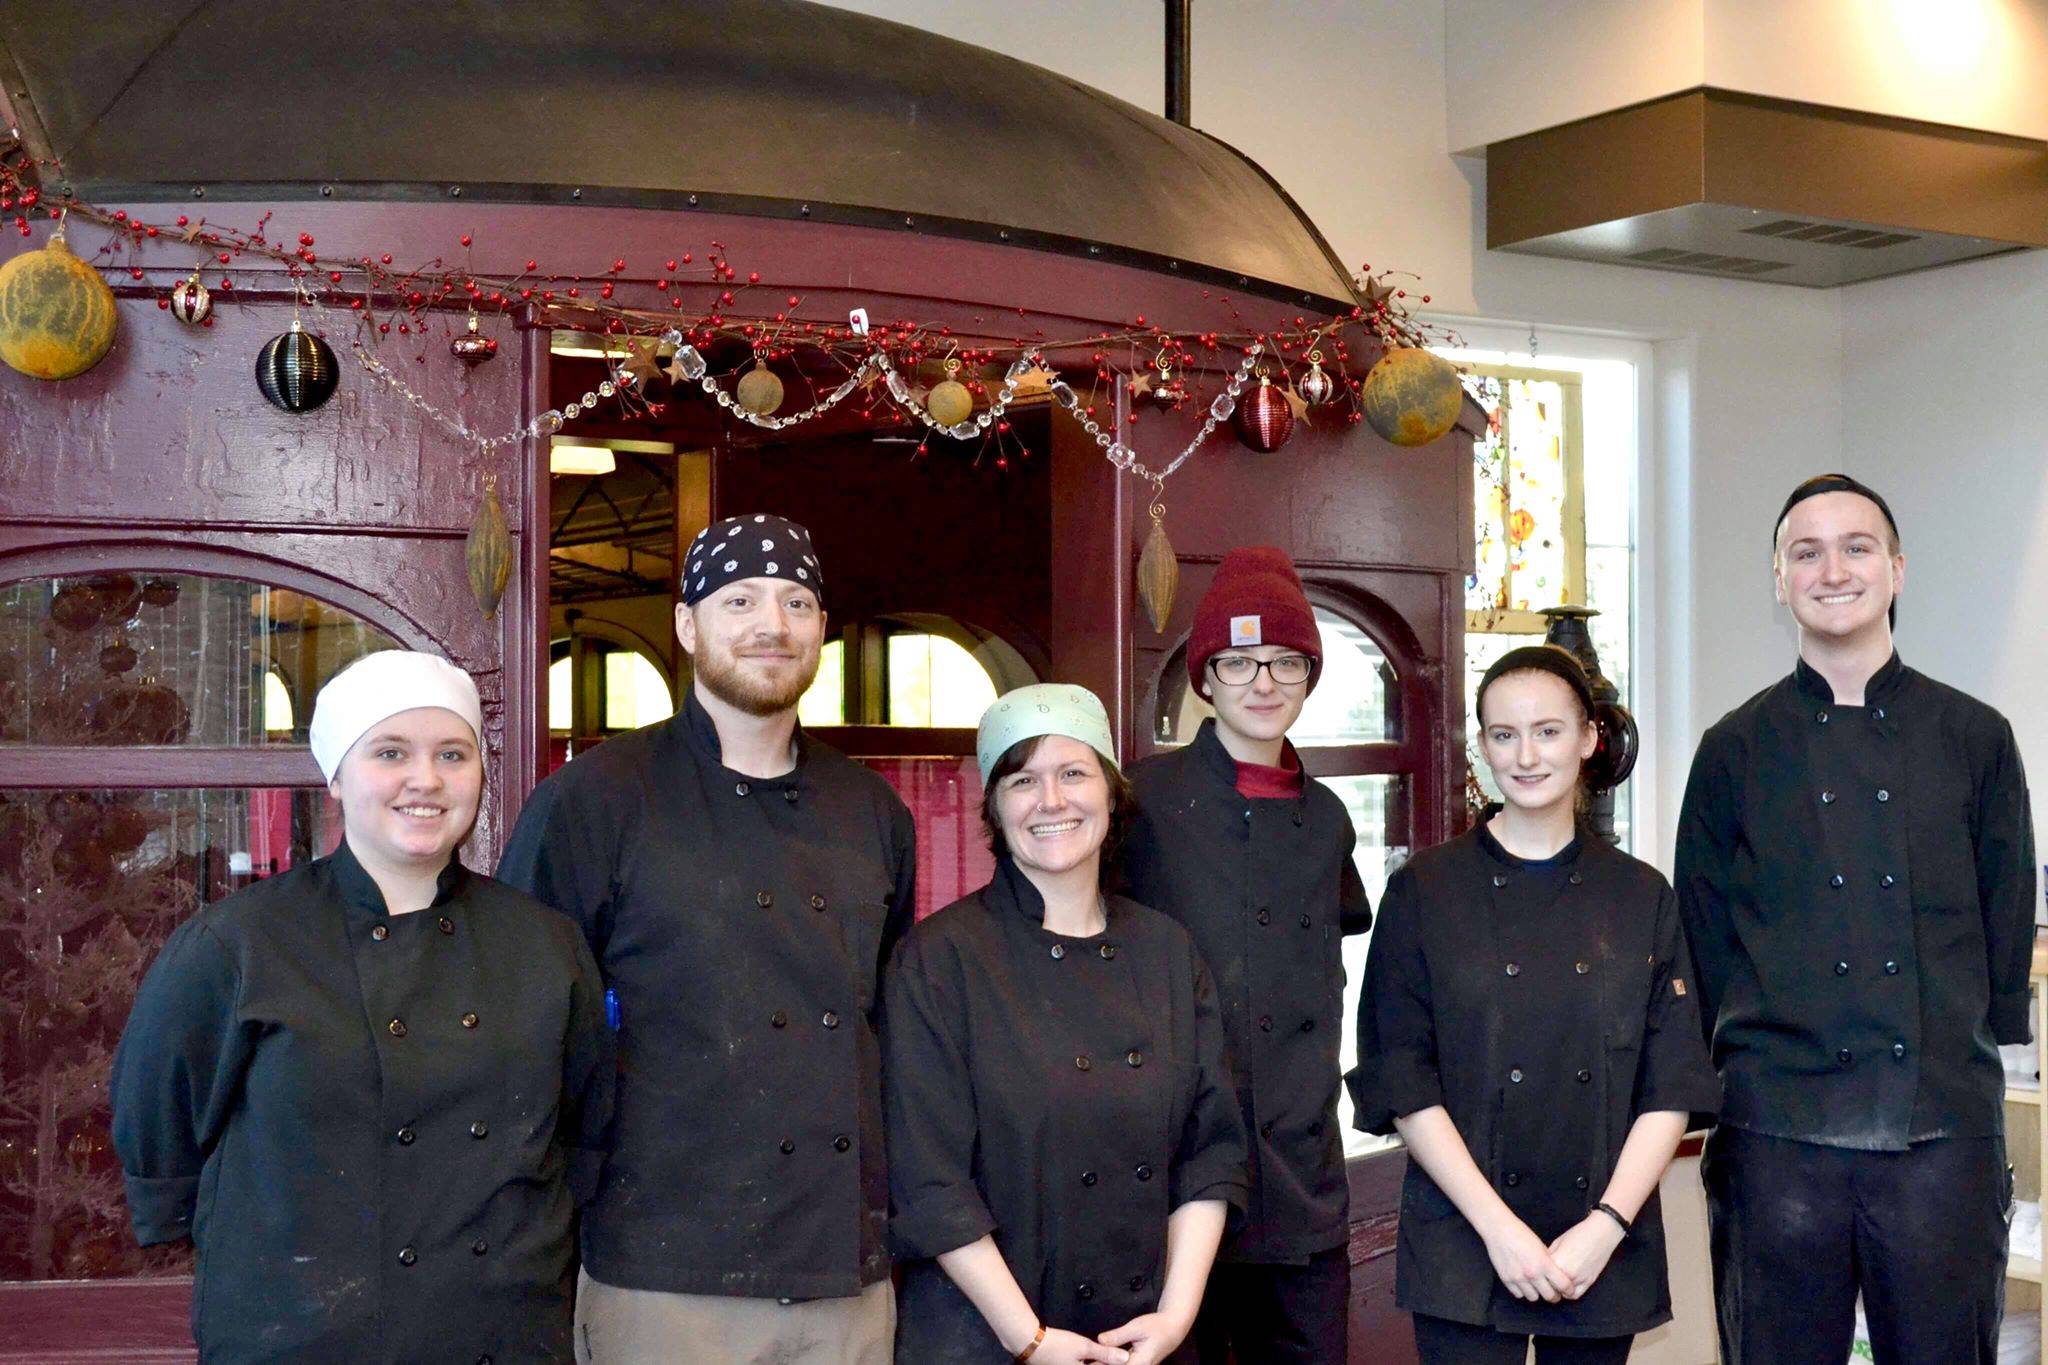 Addie Camp Train Car Eatery and Wine Bar is led by chef Maya Wilson, a local cookbook author, and her team in the kitchen on Wednesday, Jan. 2, 2018, in Soldotna, Alaska. (Photo by Victoria Petersen/Peninsula Clarion)